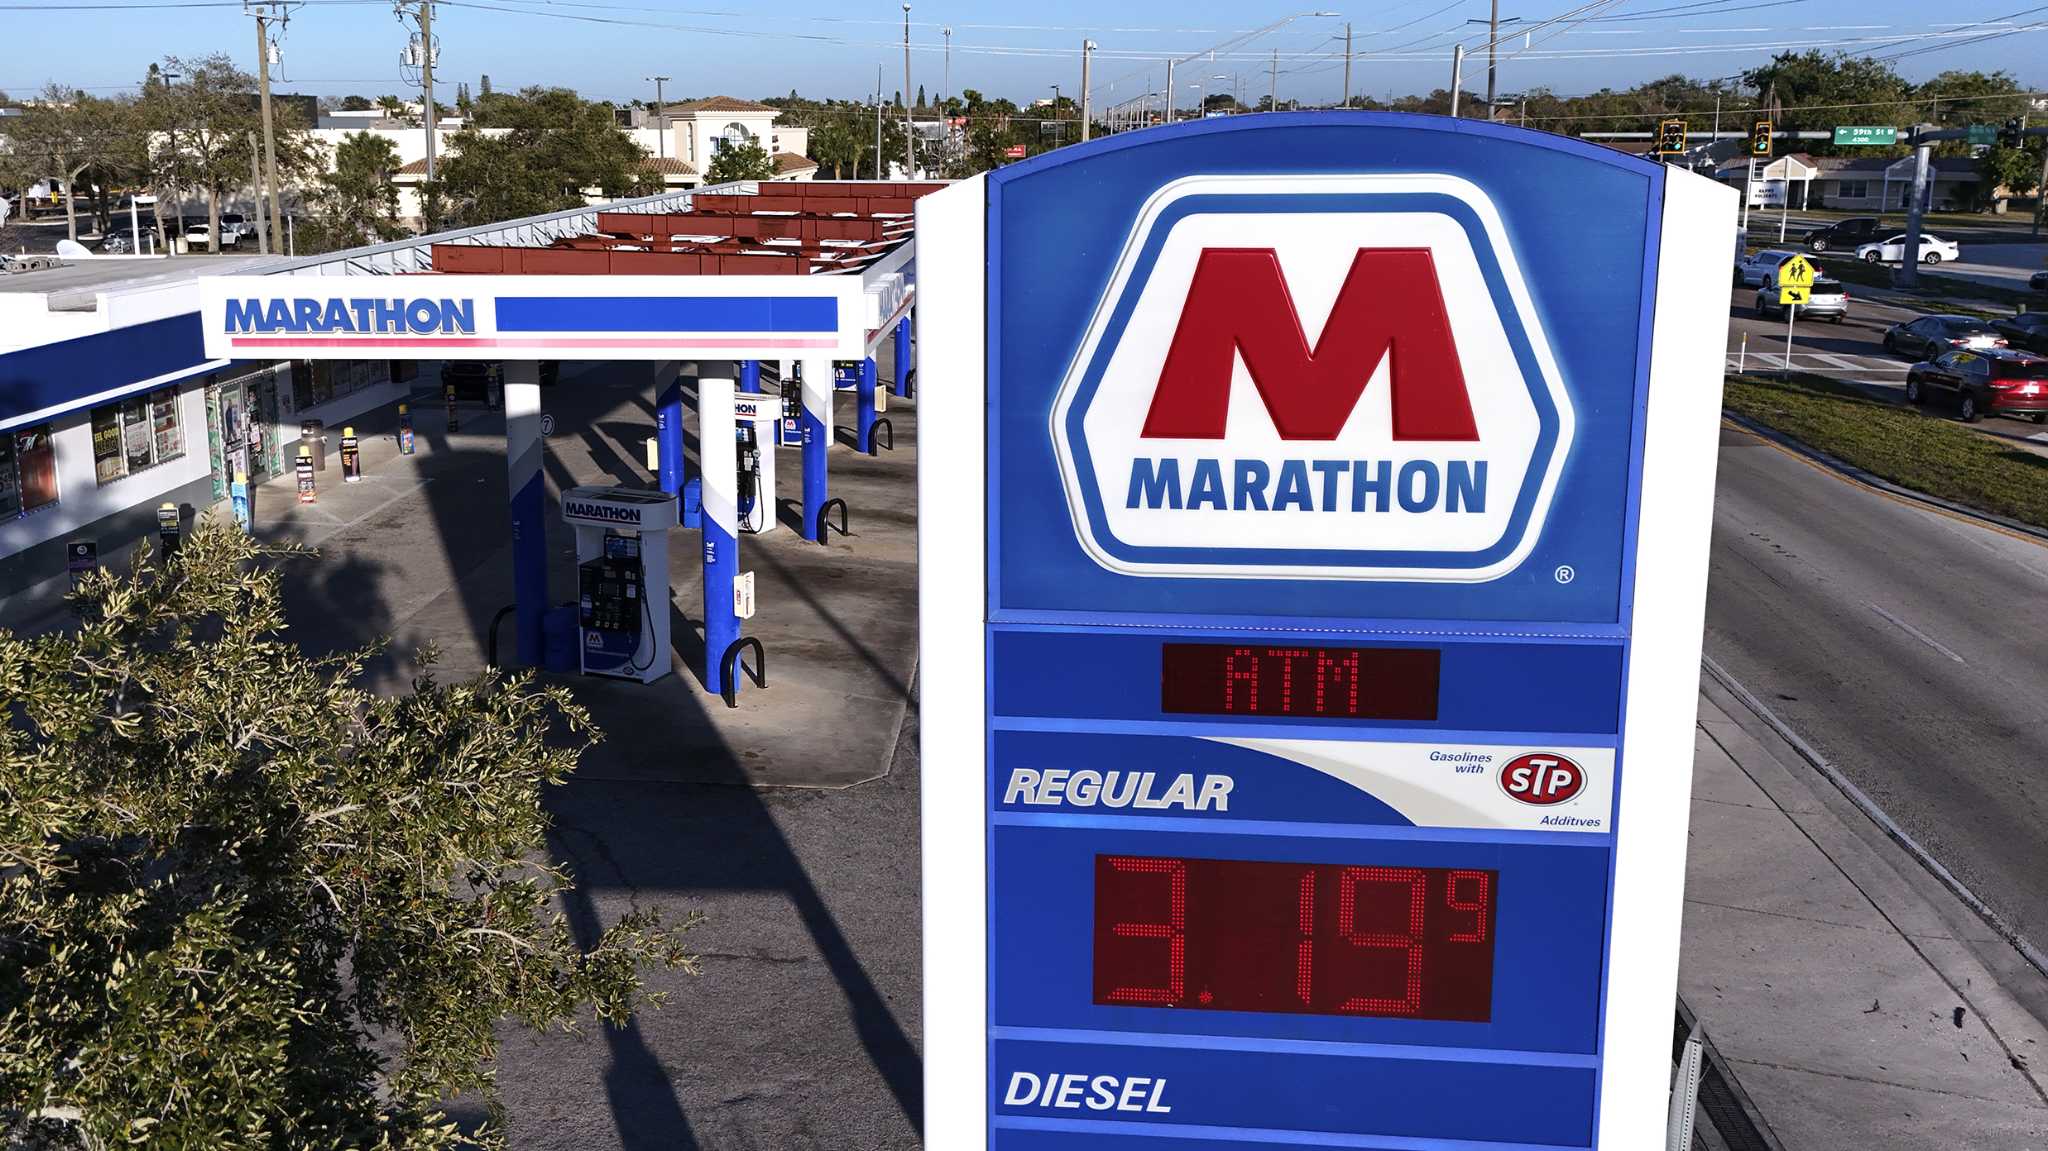 ConocoPhillips buying Marathon Oil for $17.1 billion in all-stock deal as energy prices rise